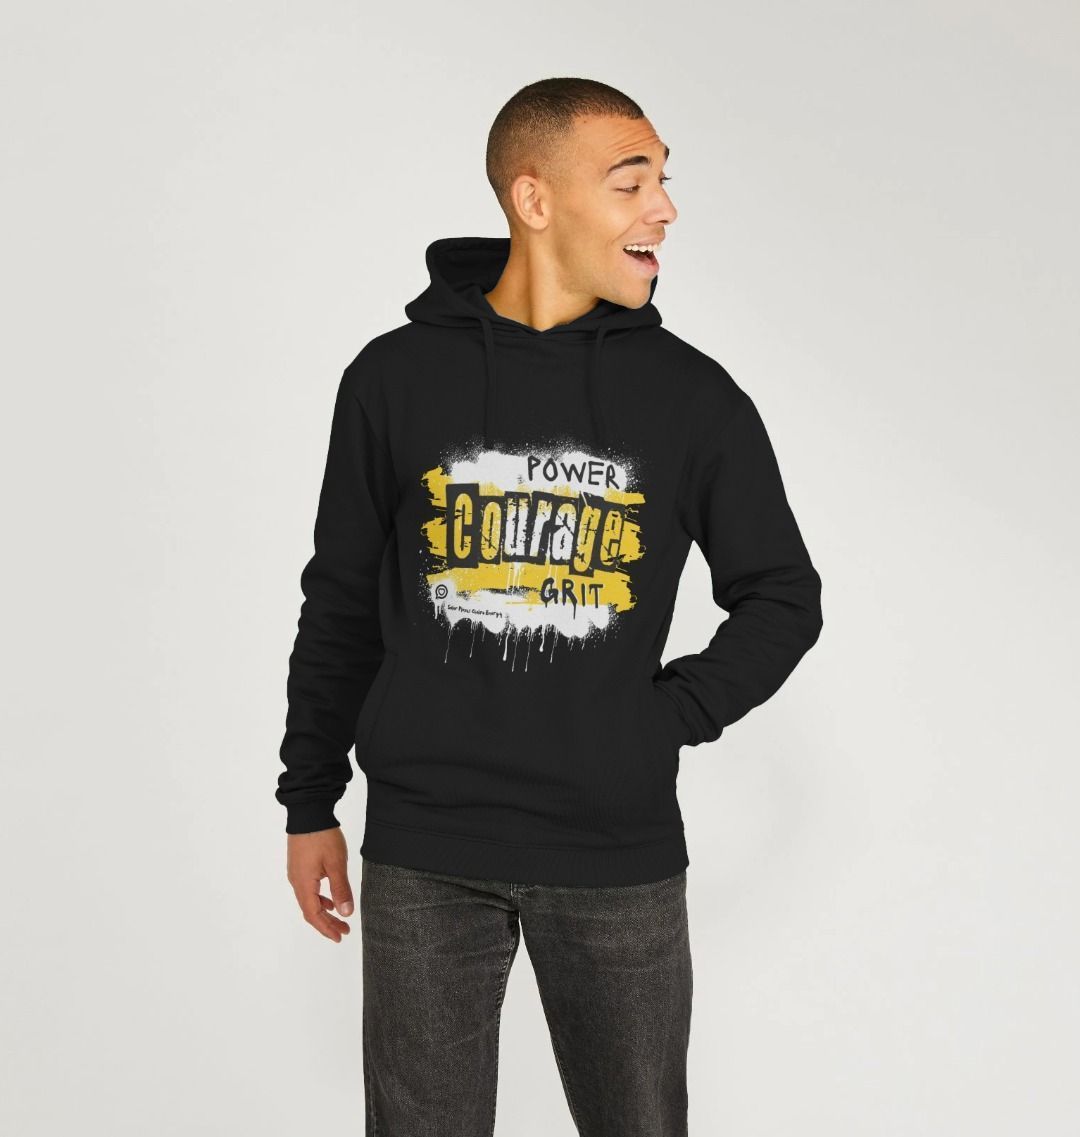 Male model wears black hooded sweatshirt with the words Power, Courage Grit, in a bold Yellow and punk inspired design 